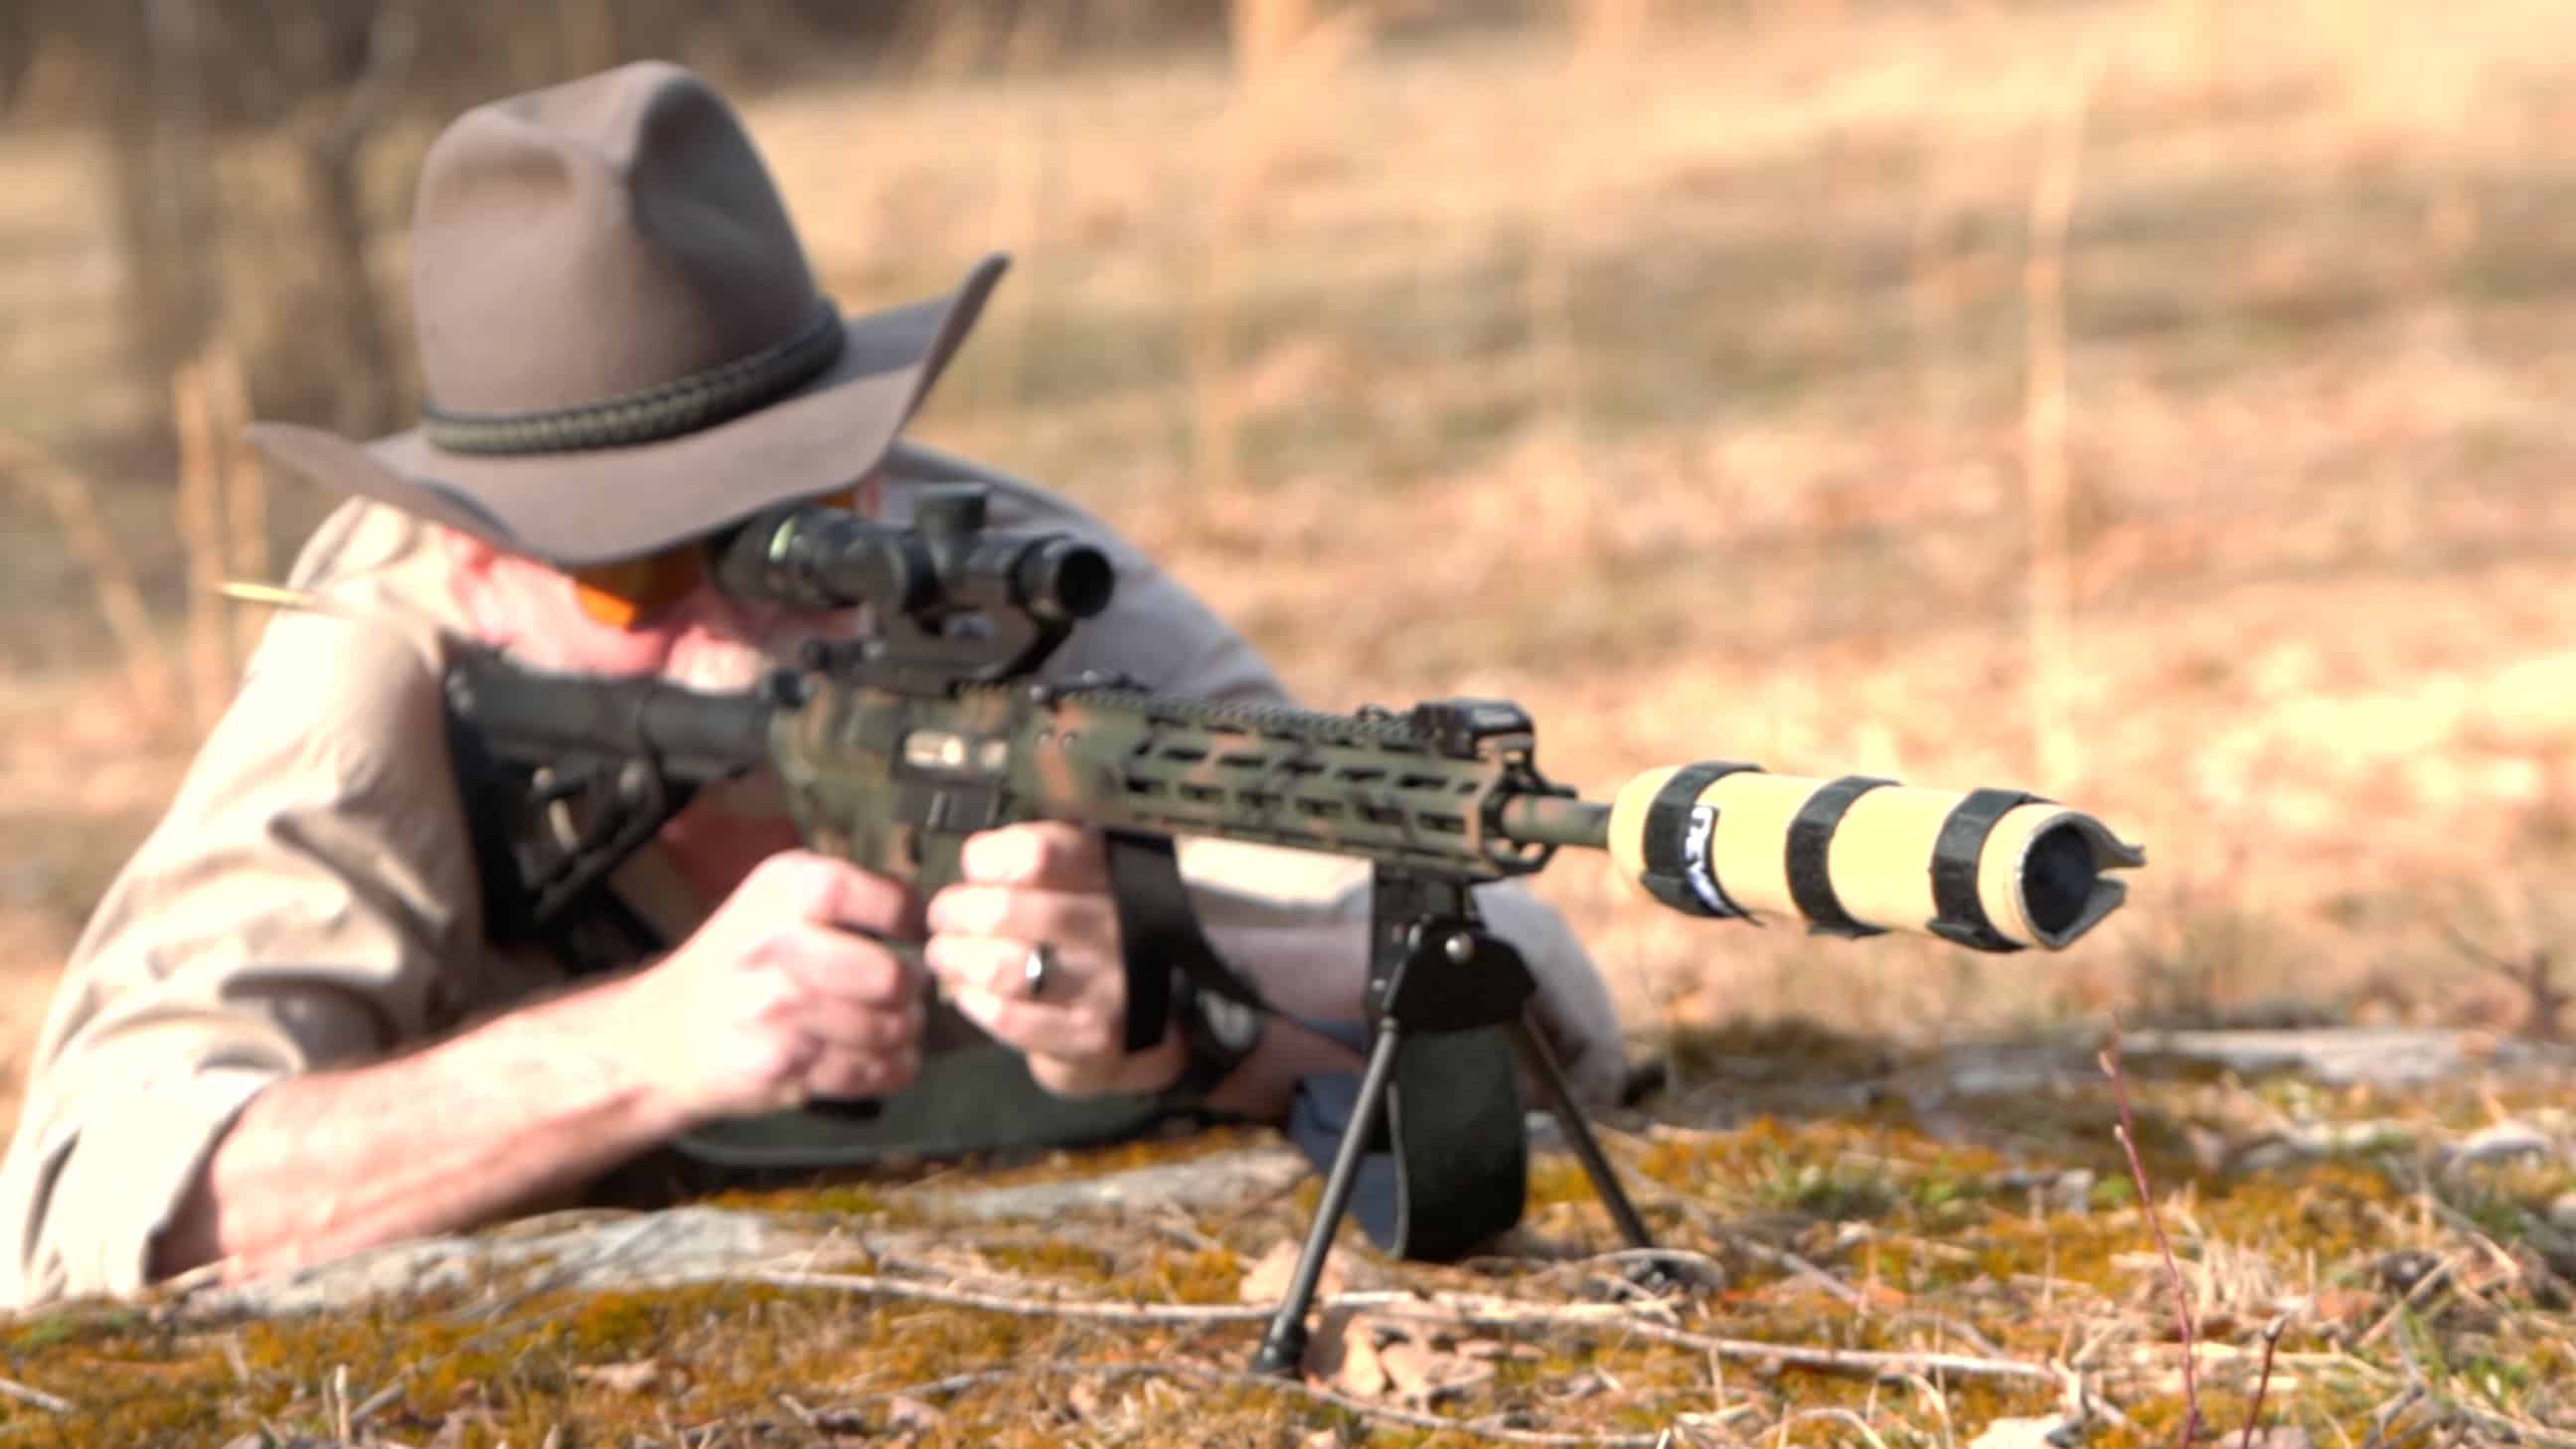 Shooting Rifle With Suppressor